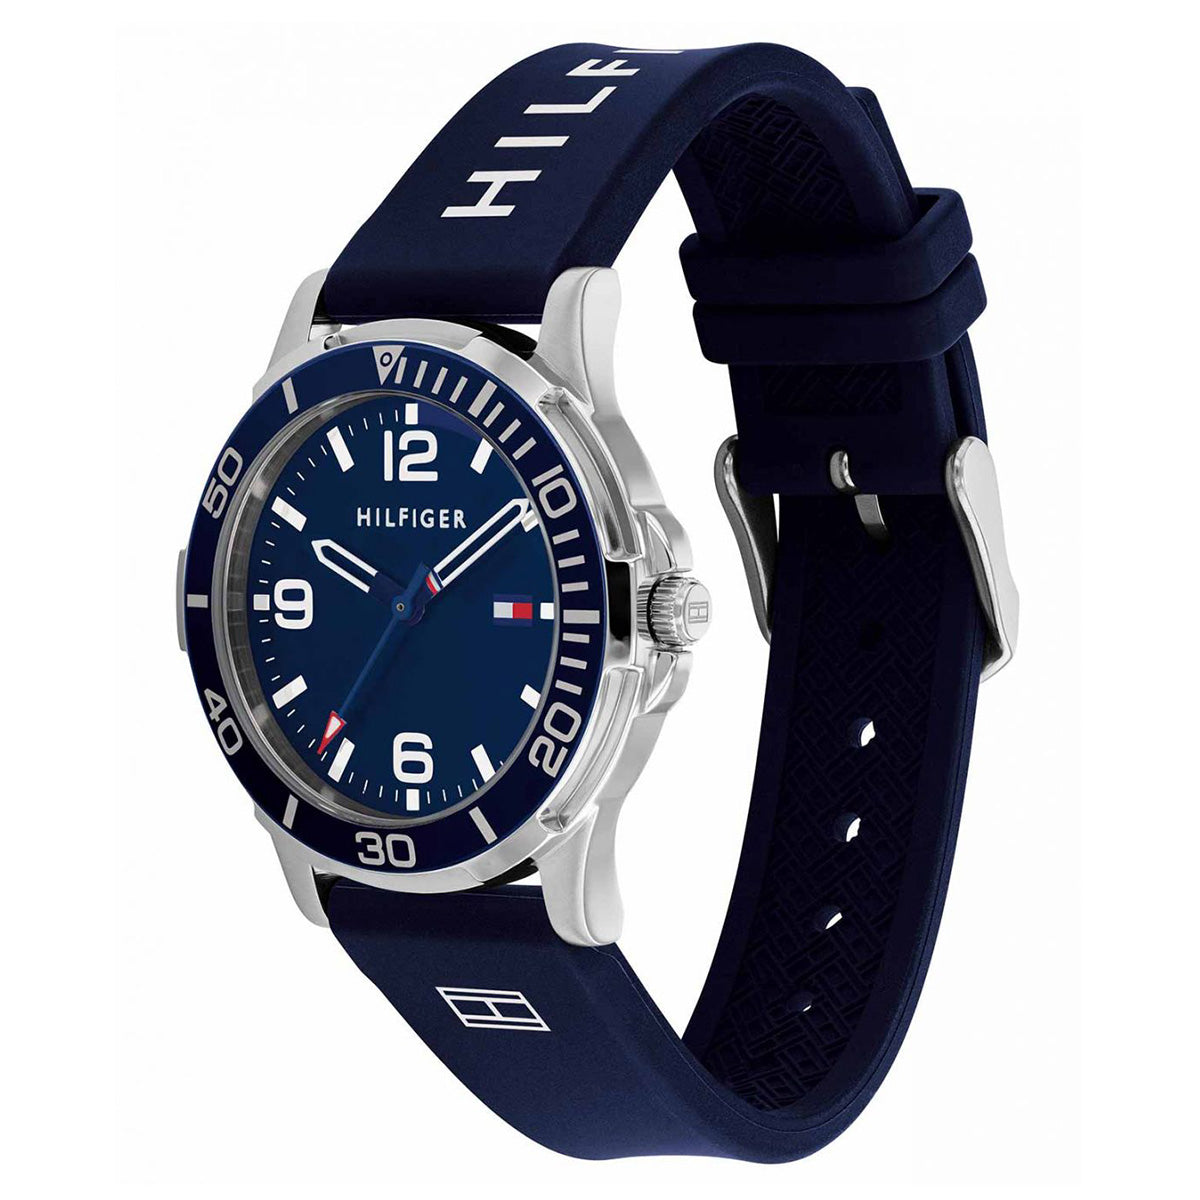 Tommy Hilfiger - Youth - 172.0016